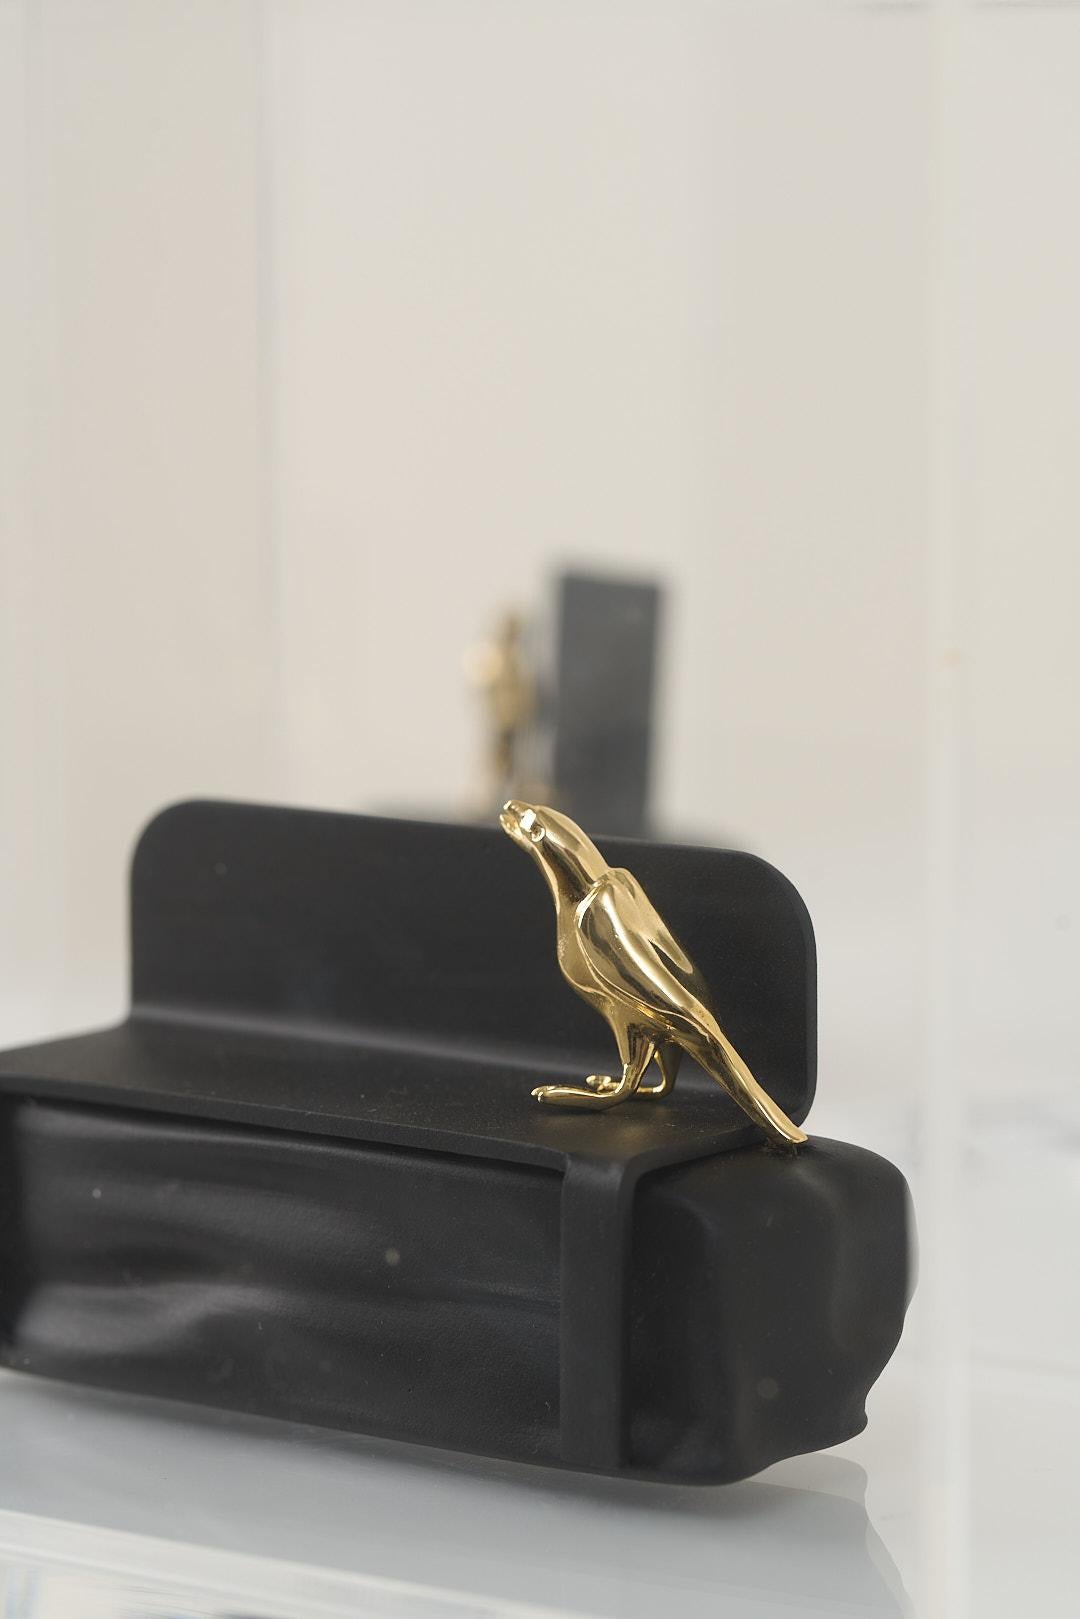 Minimalist Reconto Series, Bird Sculpture N3 in Acrylic Box For Sale